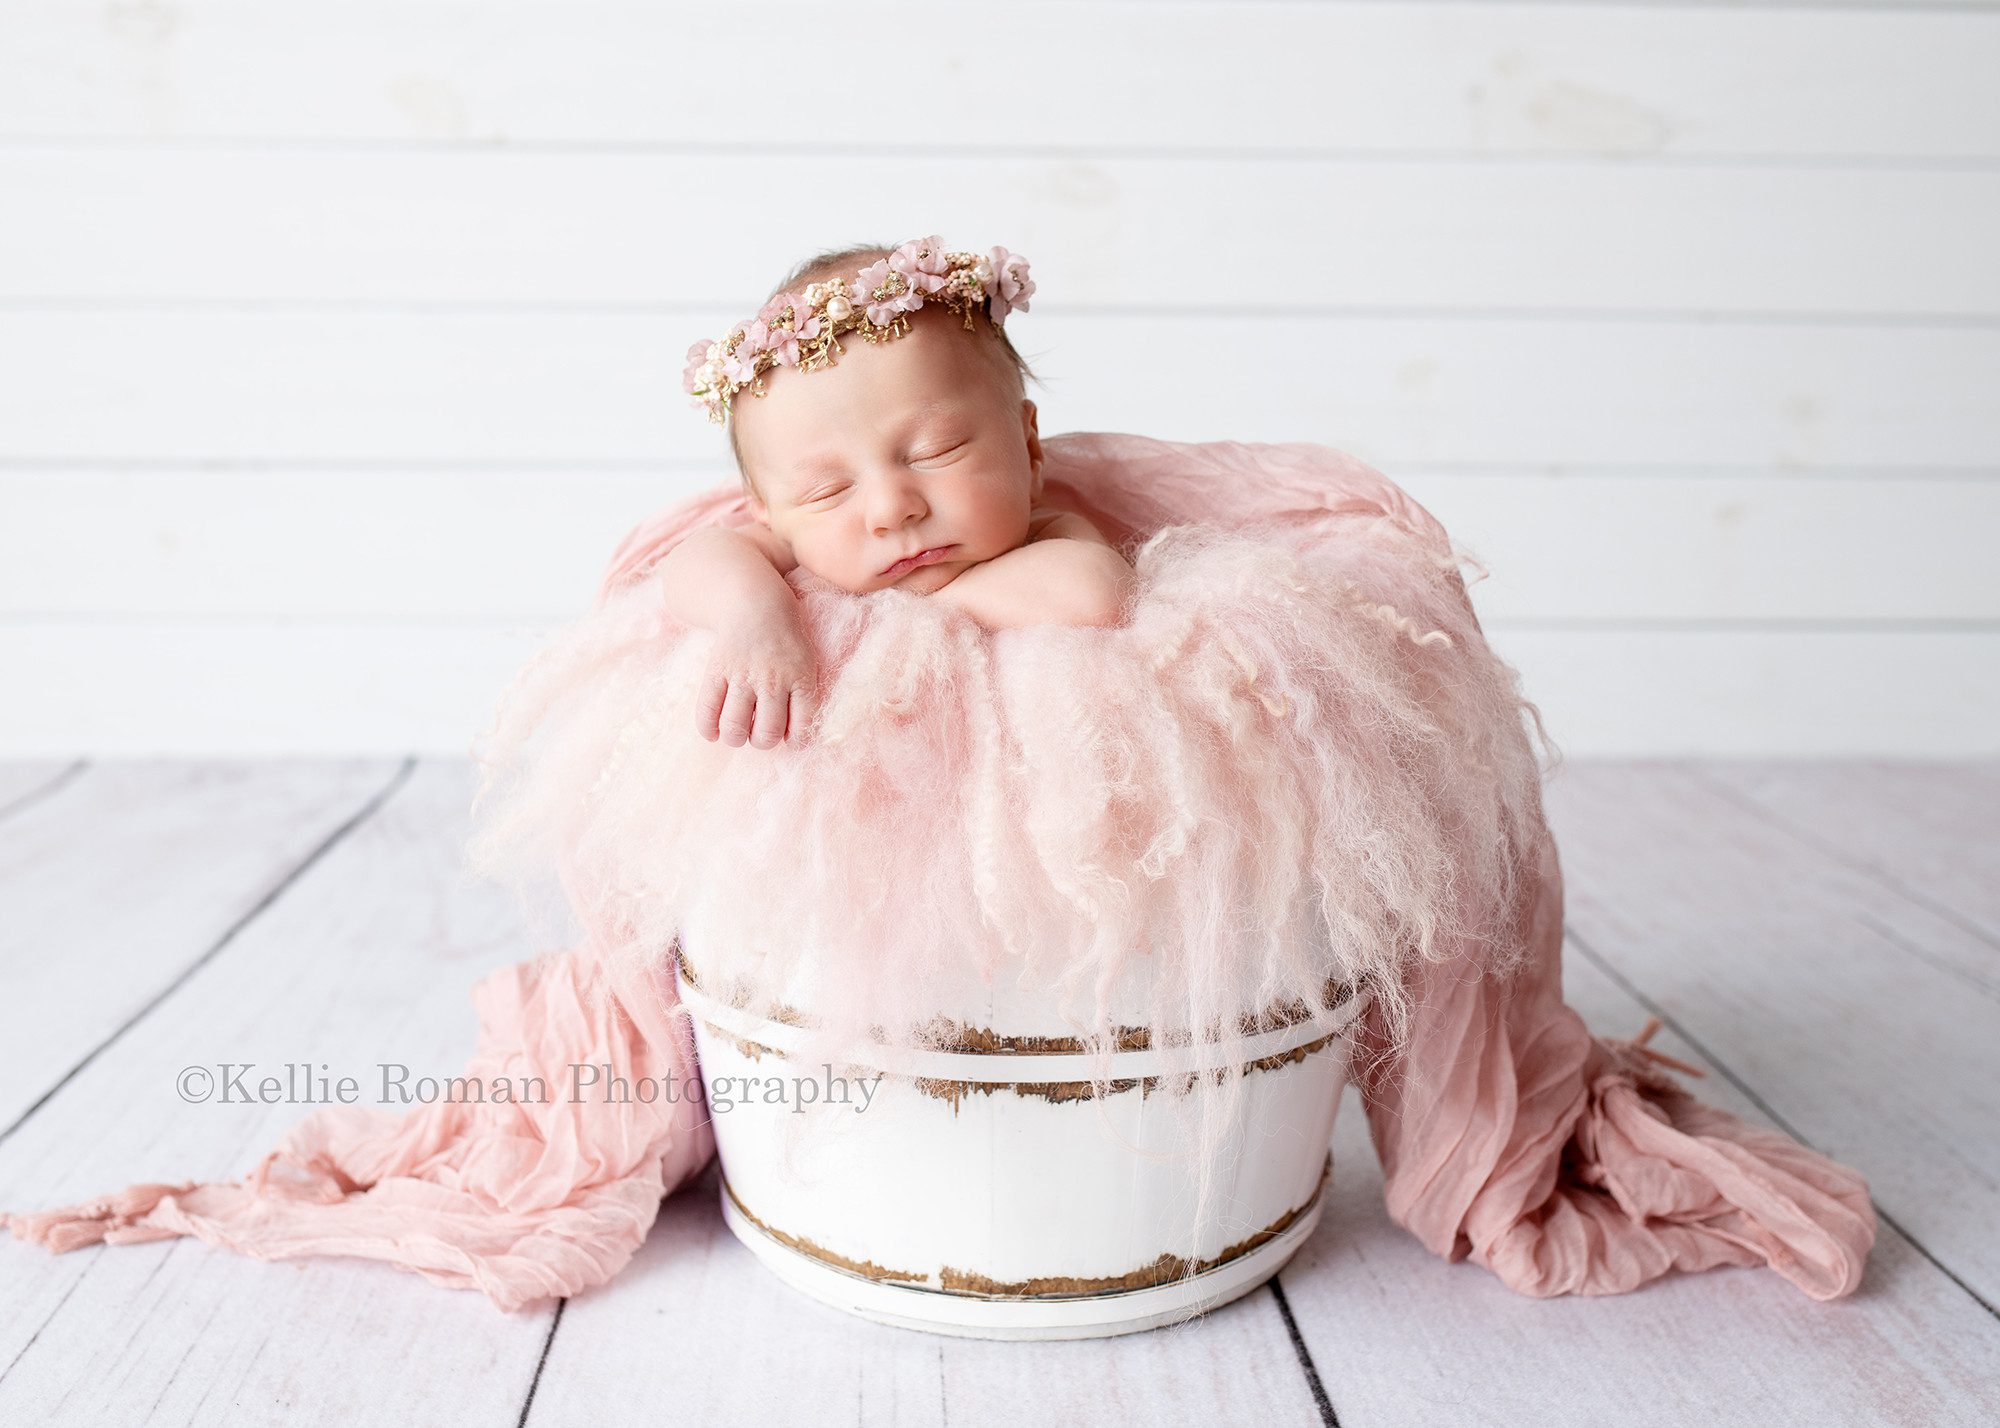 milwaukee baby whisperer a newborn baby girl in a milwaukee photogorapher studio she is posed upright in a white wood bucket filled with light pink fur and fabric. She has one arm hanging over the edge of the bucket and the other is under her chin she has a pink and gold headband on and is in front of a white wood wall with white wood floor under her.